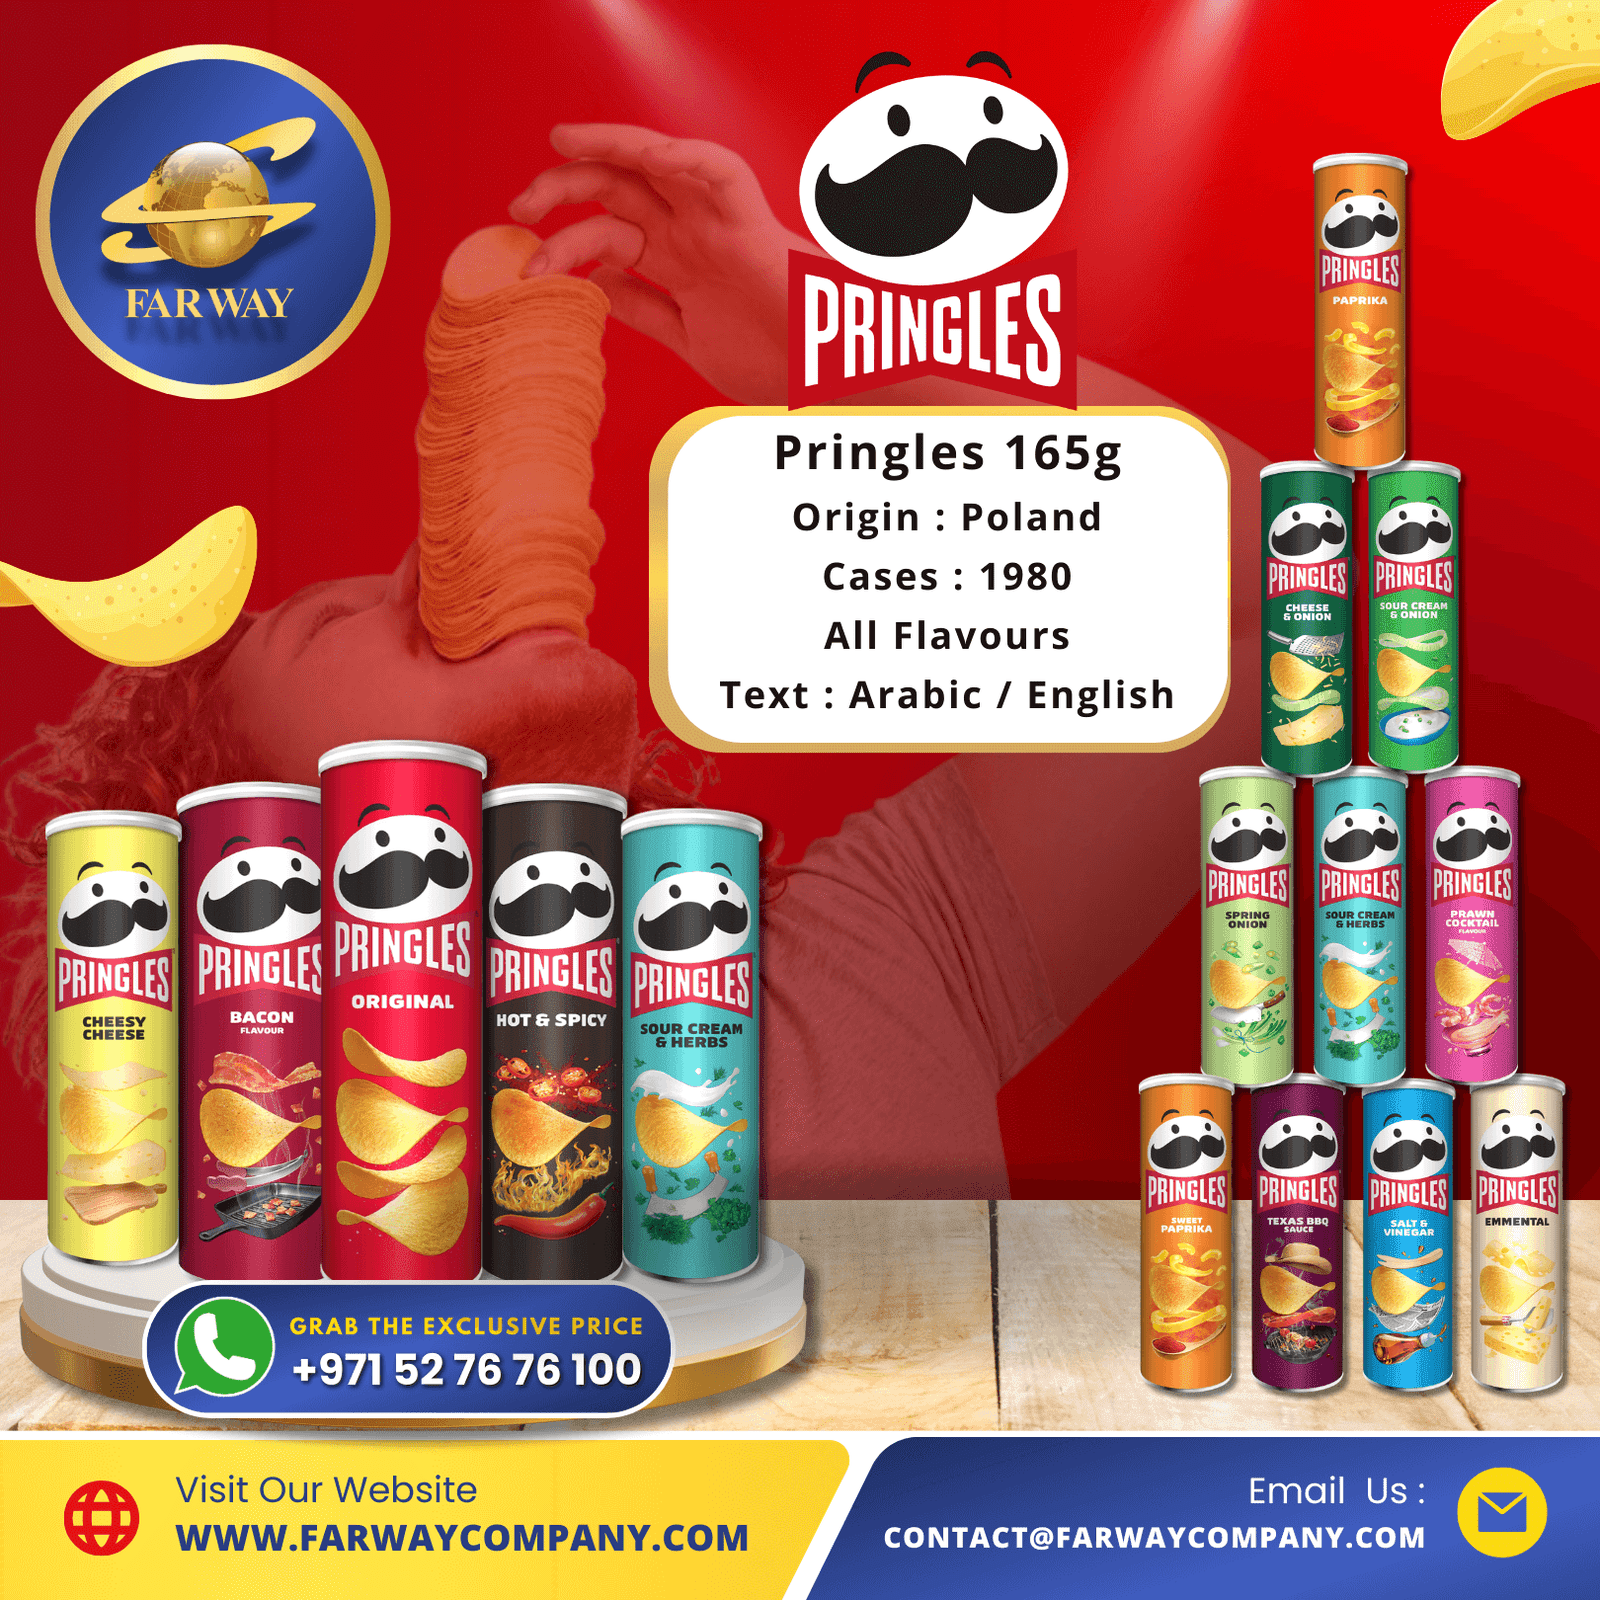 Pringles Importer / Exporter in Dubai, UAE, Middle East only at Far Way